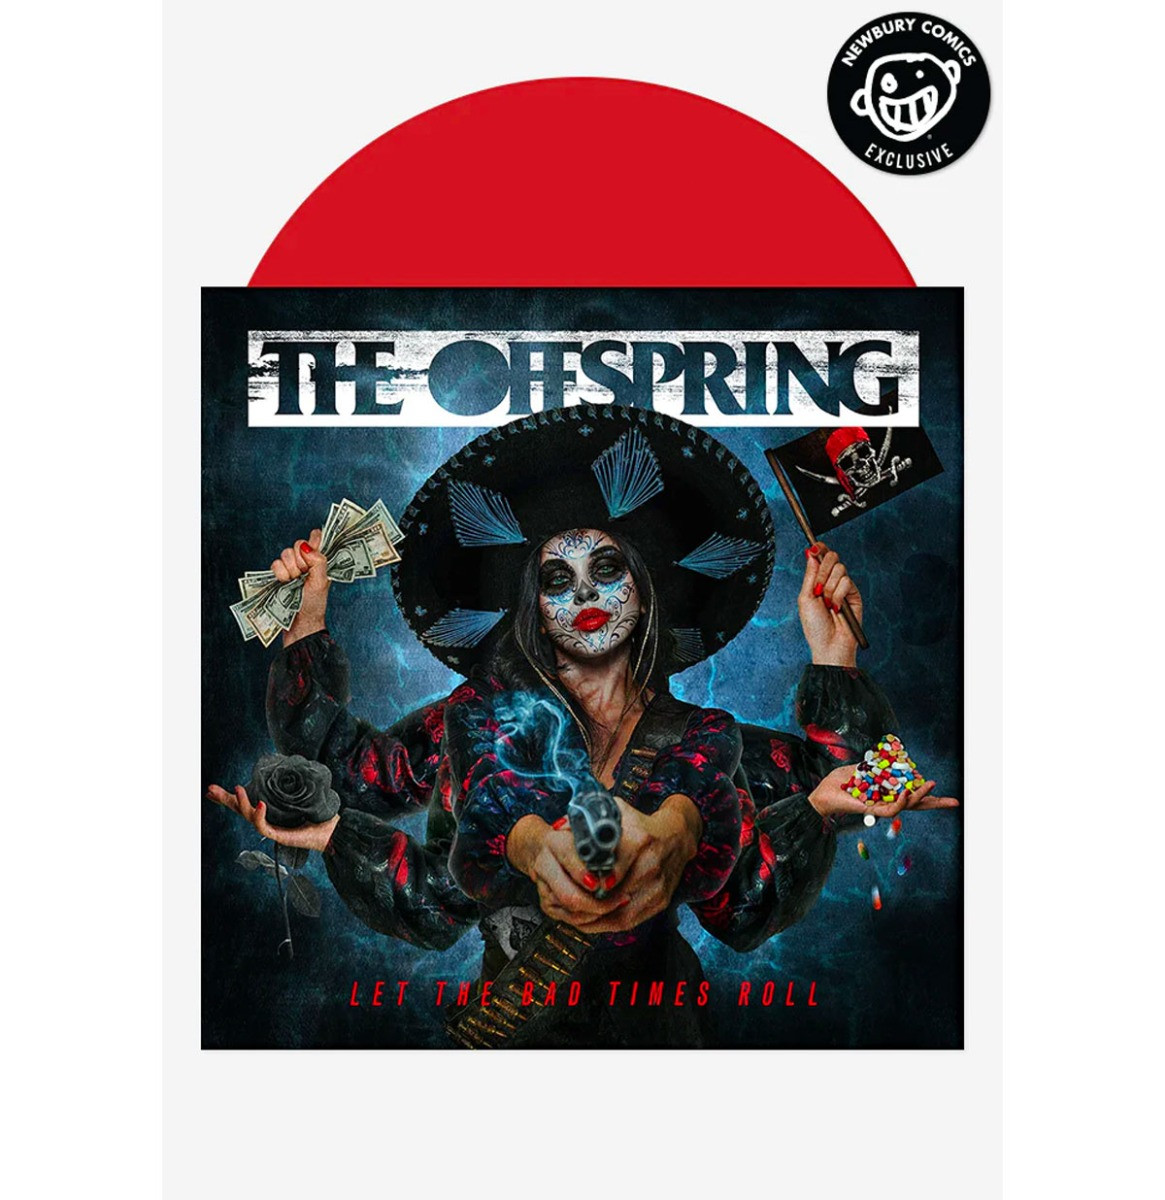 The Offspring - Let The Bad Times Roll (Ruby Rood Vinyl) (Newbury Comics Exclusive) LP